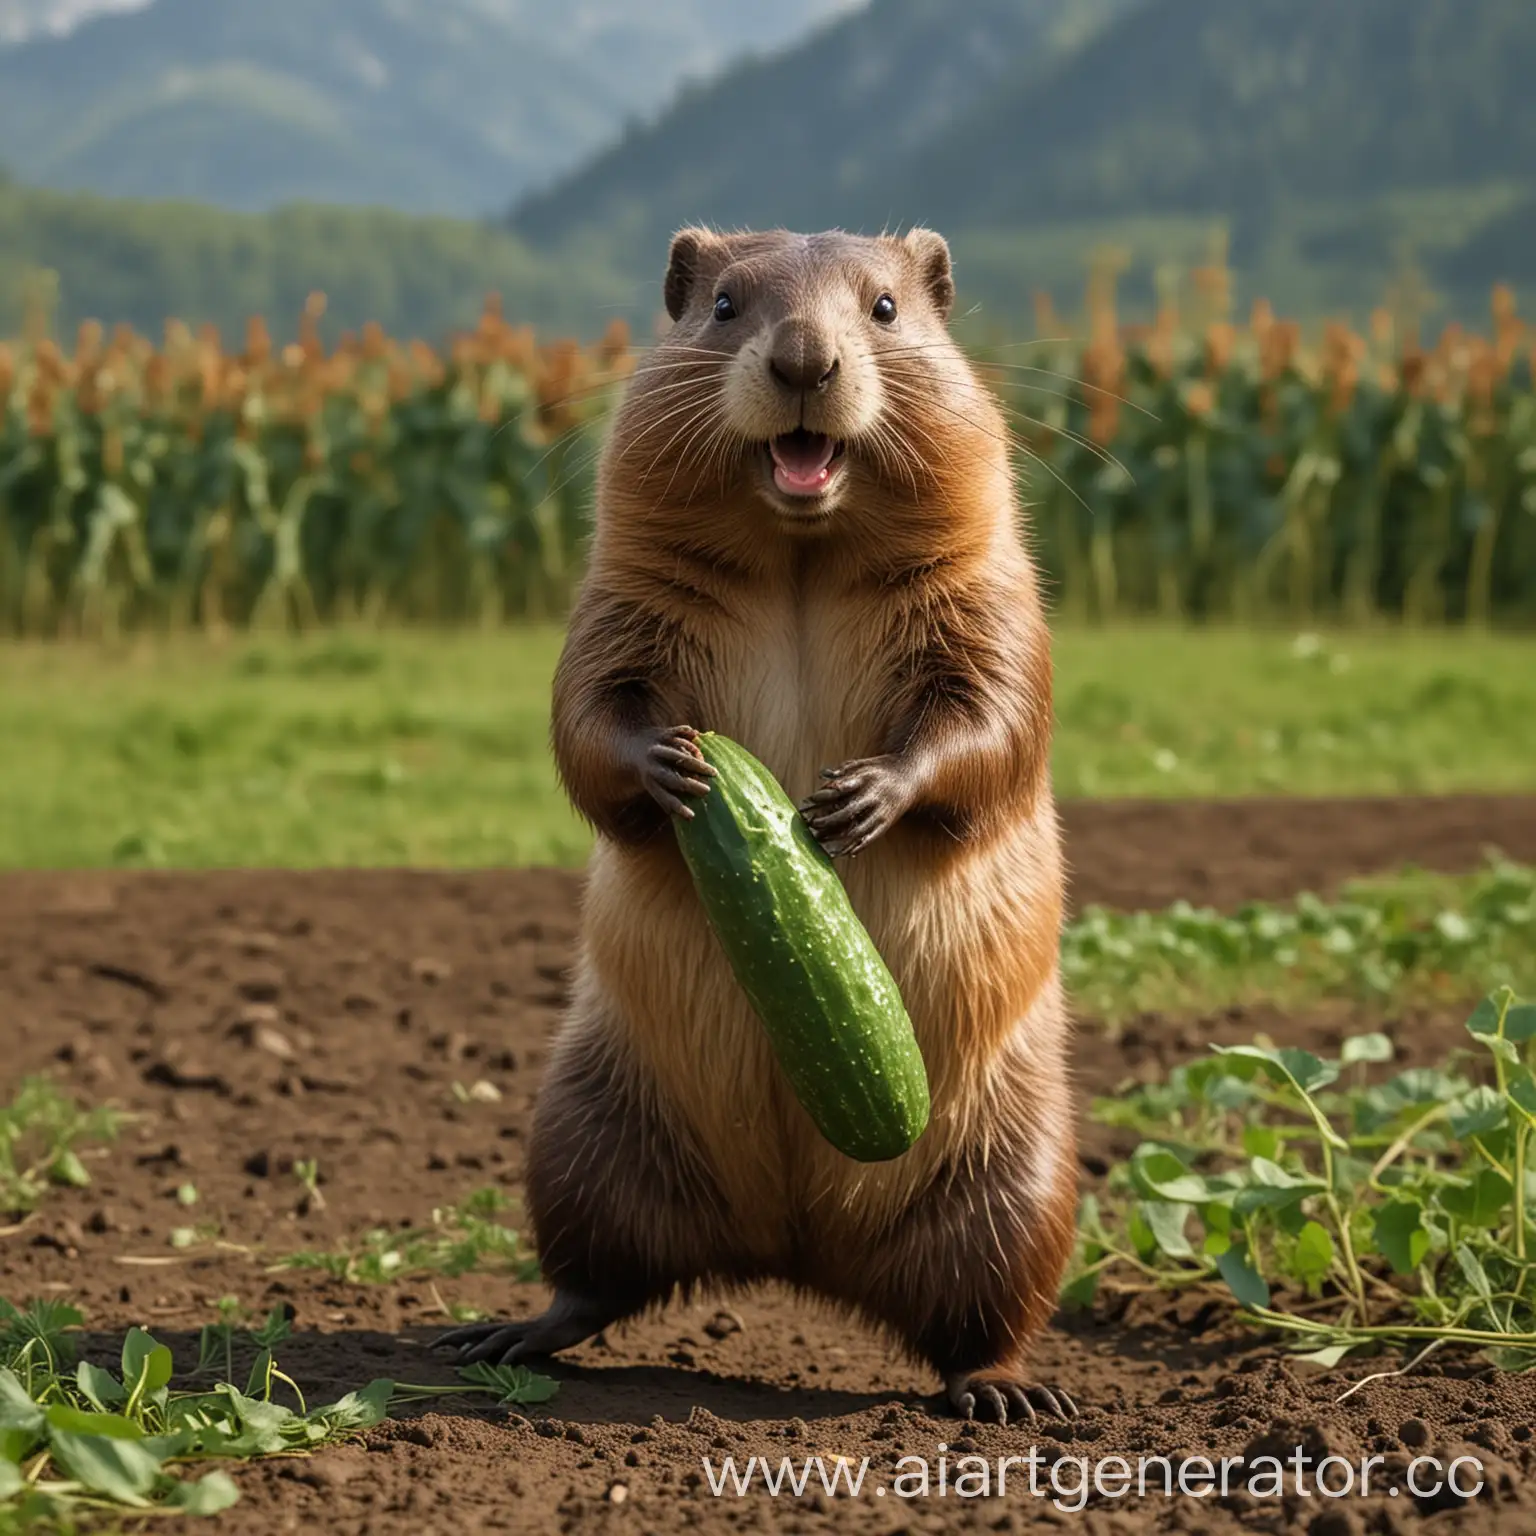 Beaver-Dancing-with-Cucumber-in-Field